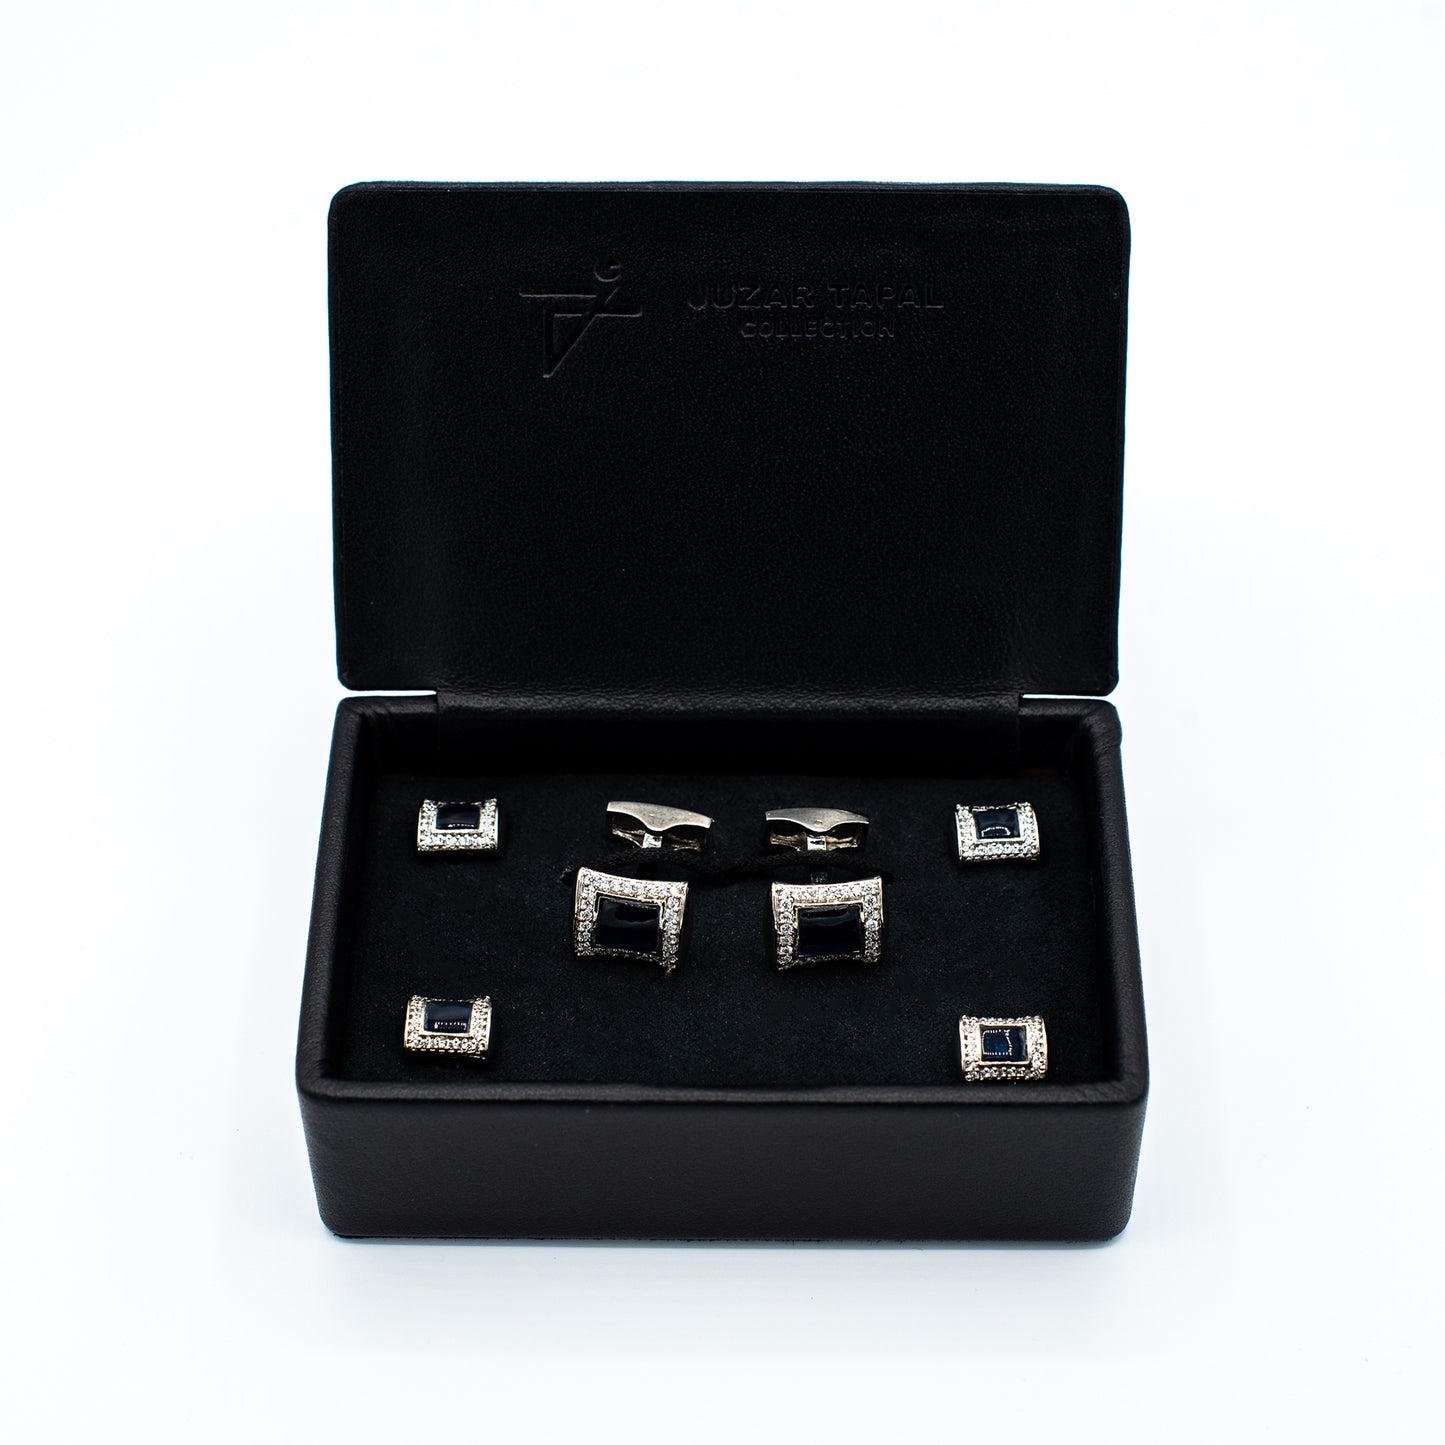 Cufflinks for Men Sterling 925 Silver With Steel Plating Cufflinks Studded With Sparkling VVS Zircon Suited For All Occasions